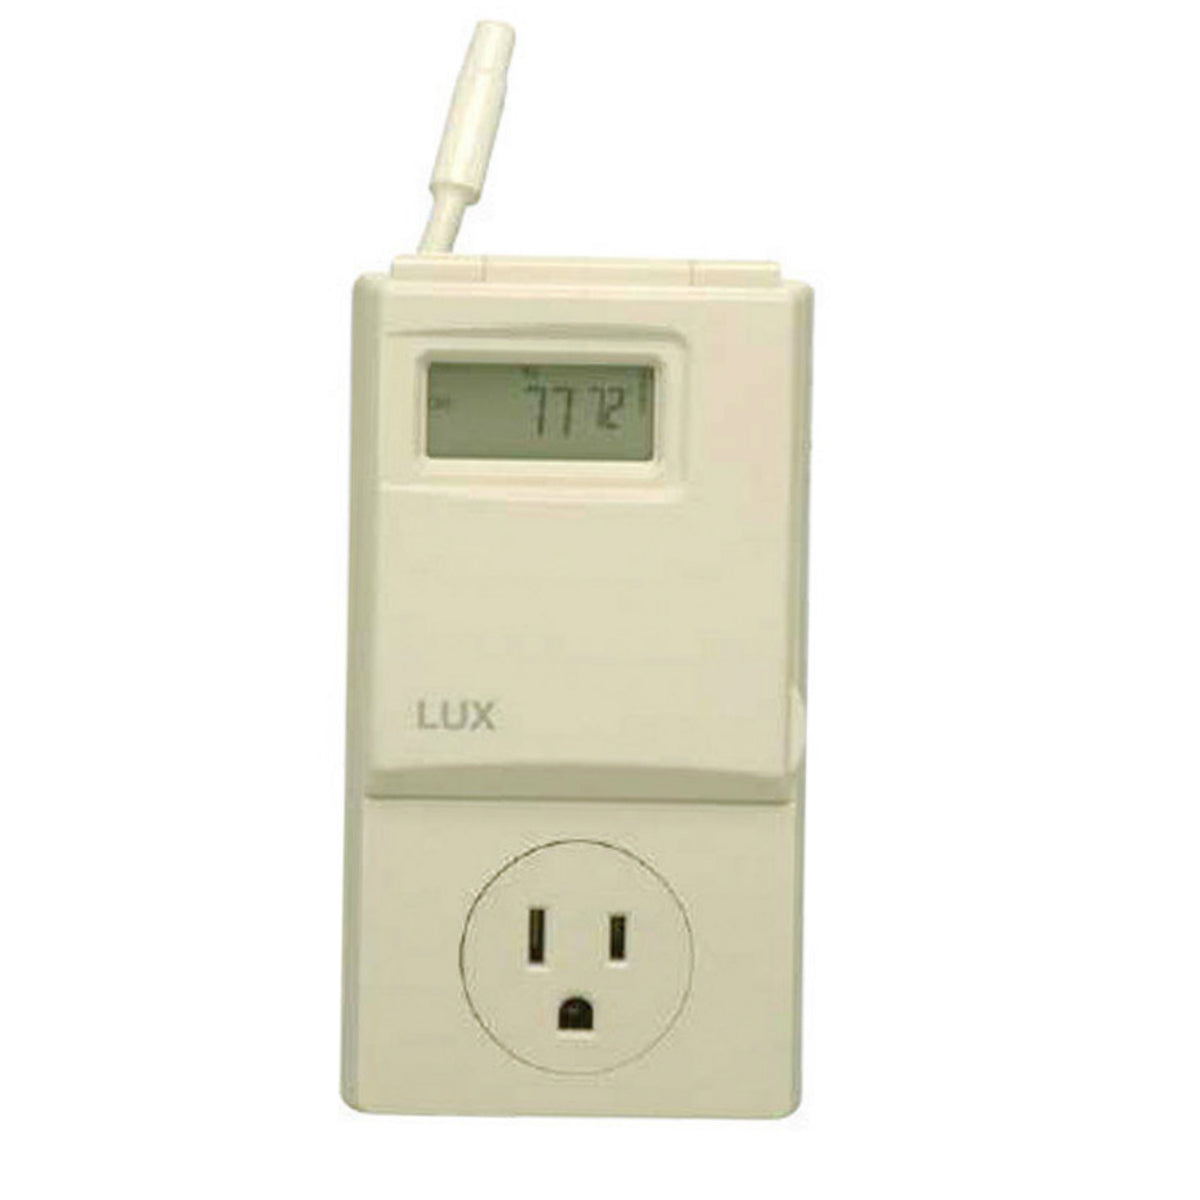 buy programmable thermostats at cheap rate in bulk. wholesale & retail heat & cooling repair parts store.